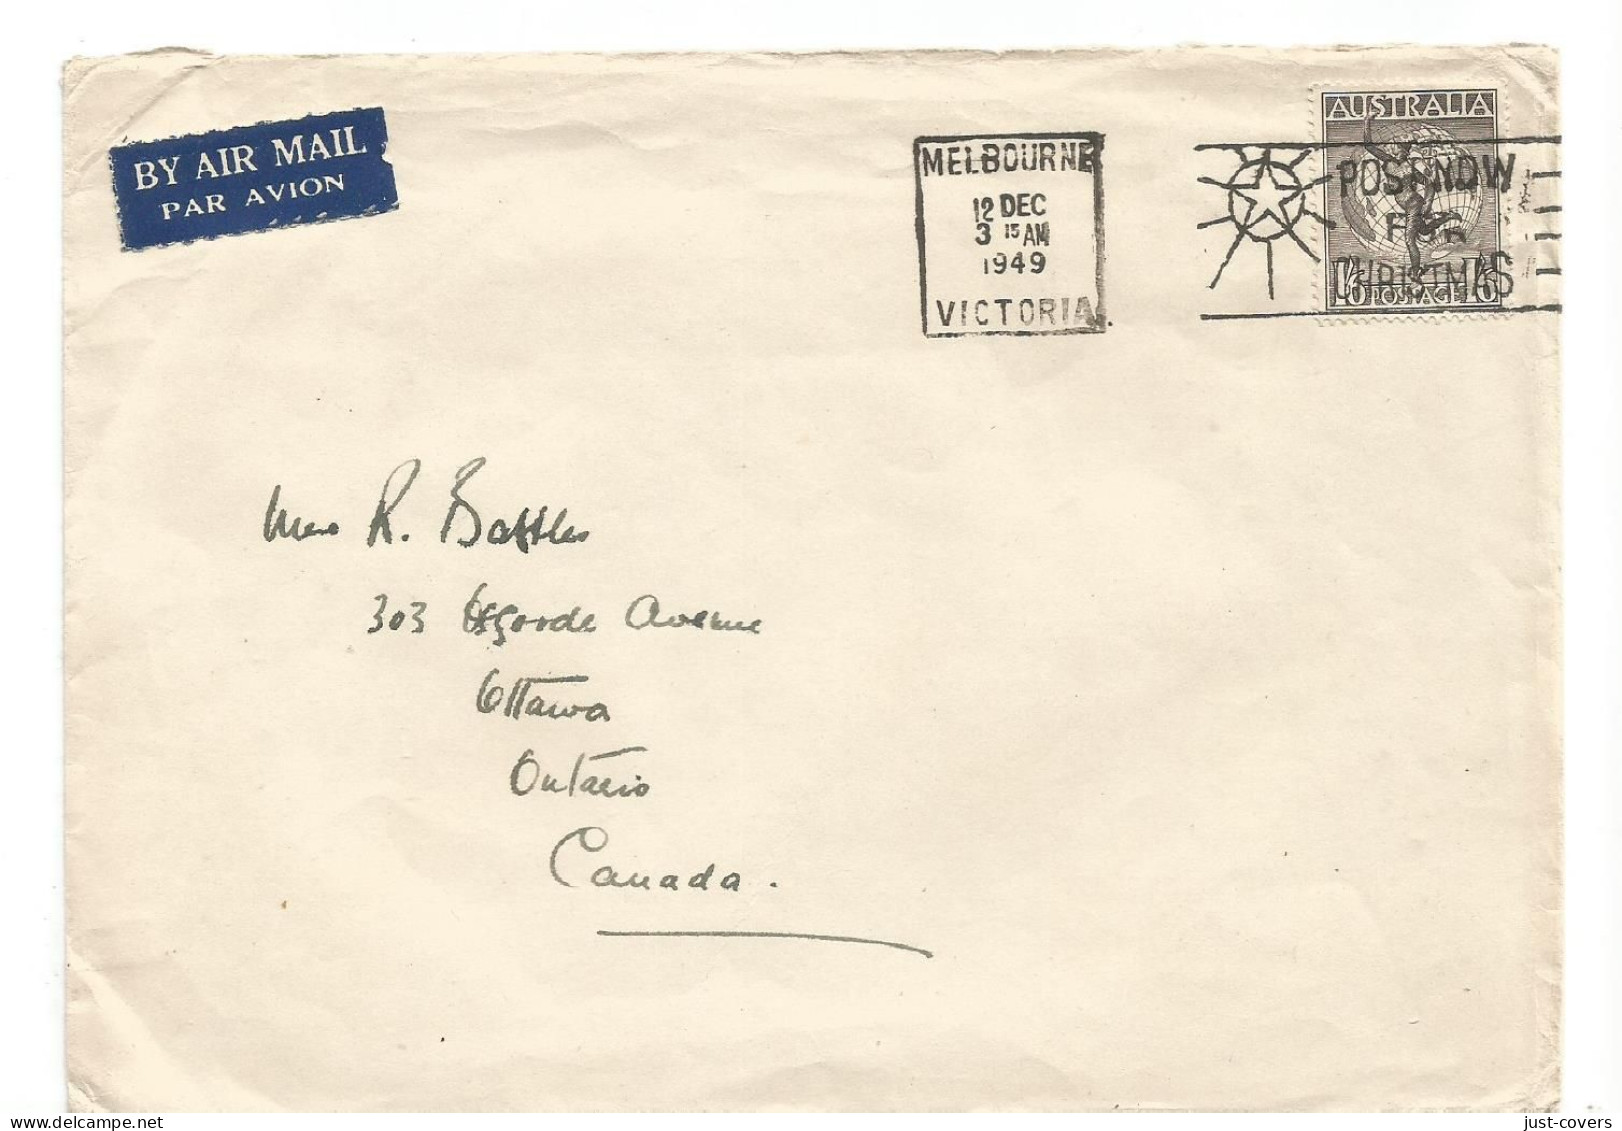 Melbourne Victoriqa Aistralia Dec 12 1949 With Post Now For Christmas Slogan ...............box9 - Covers & Documents